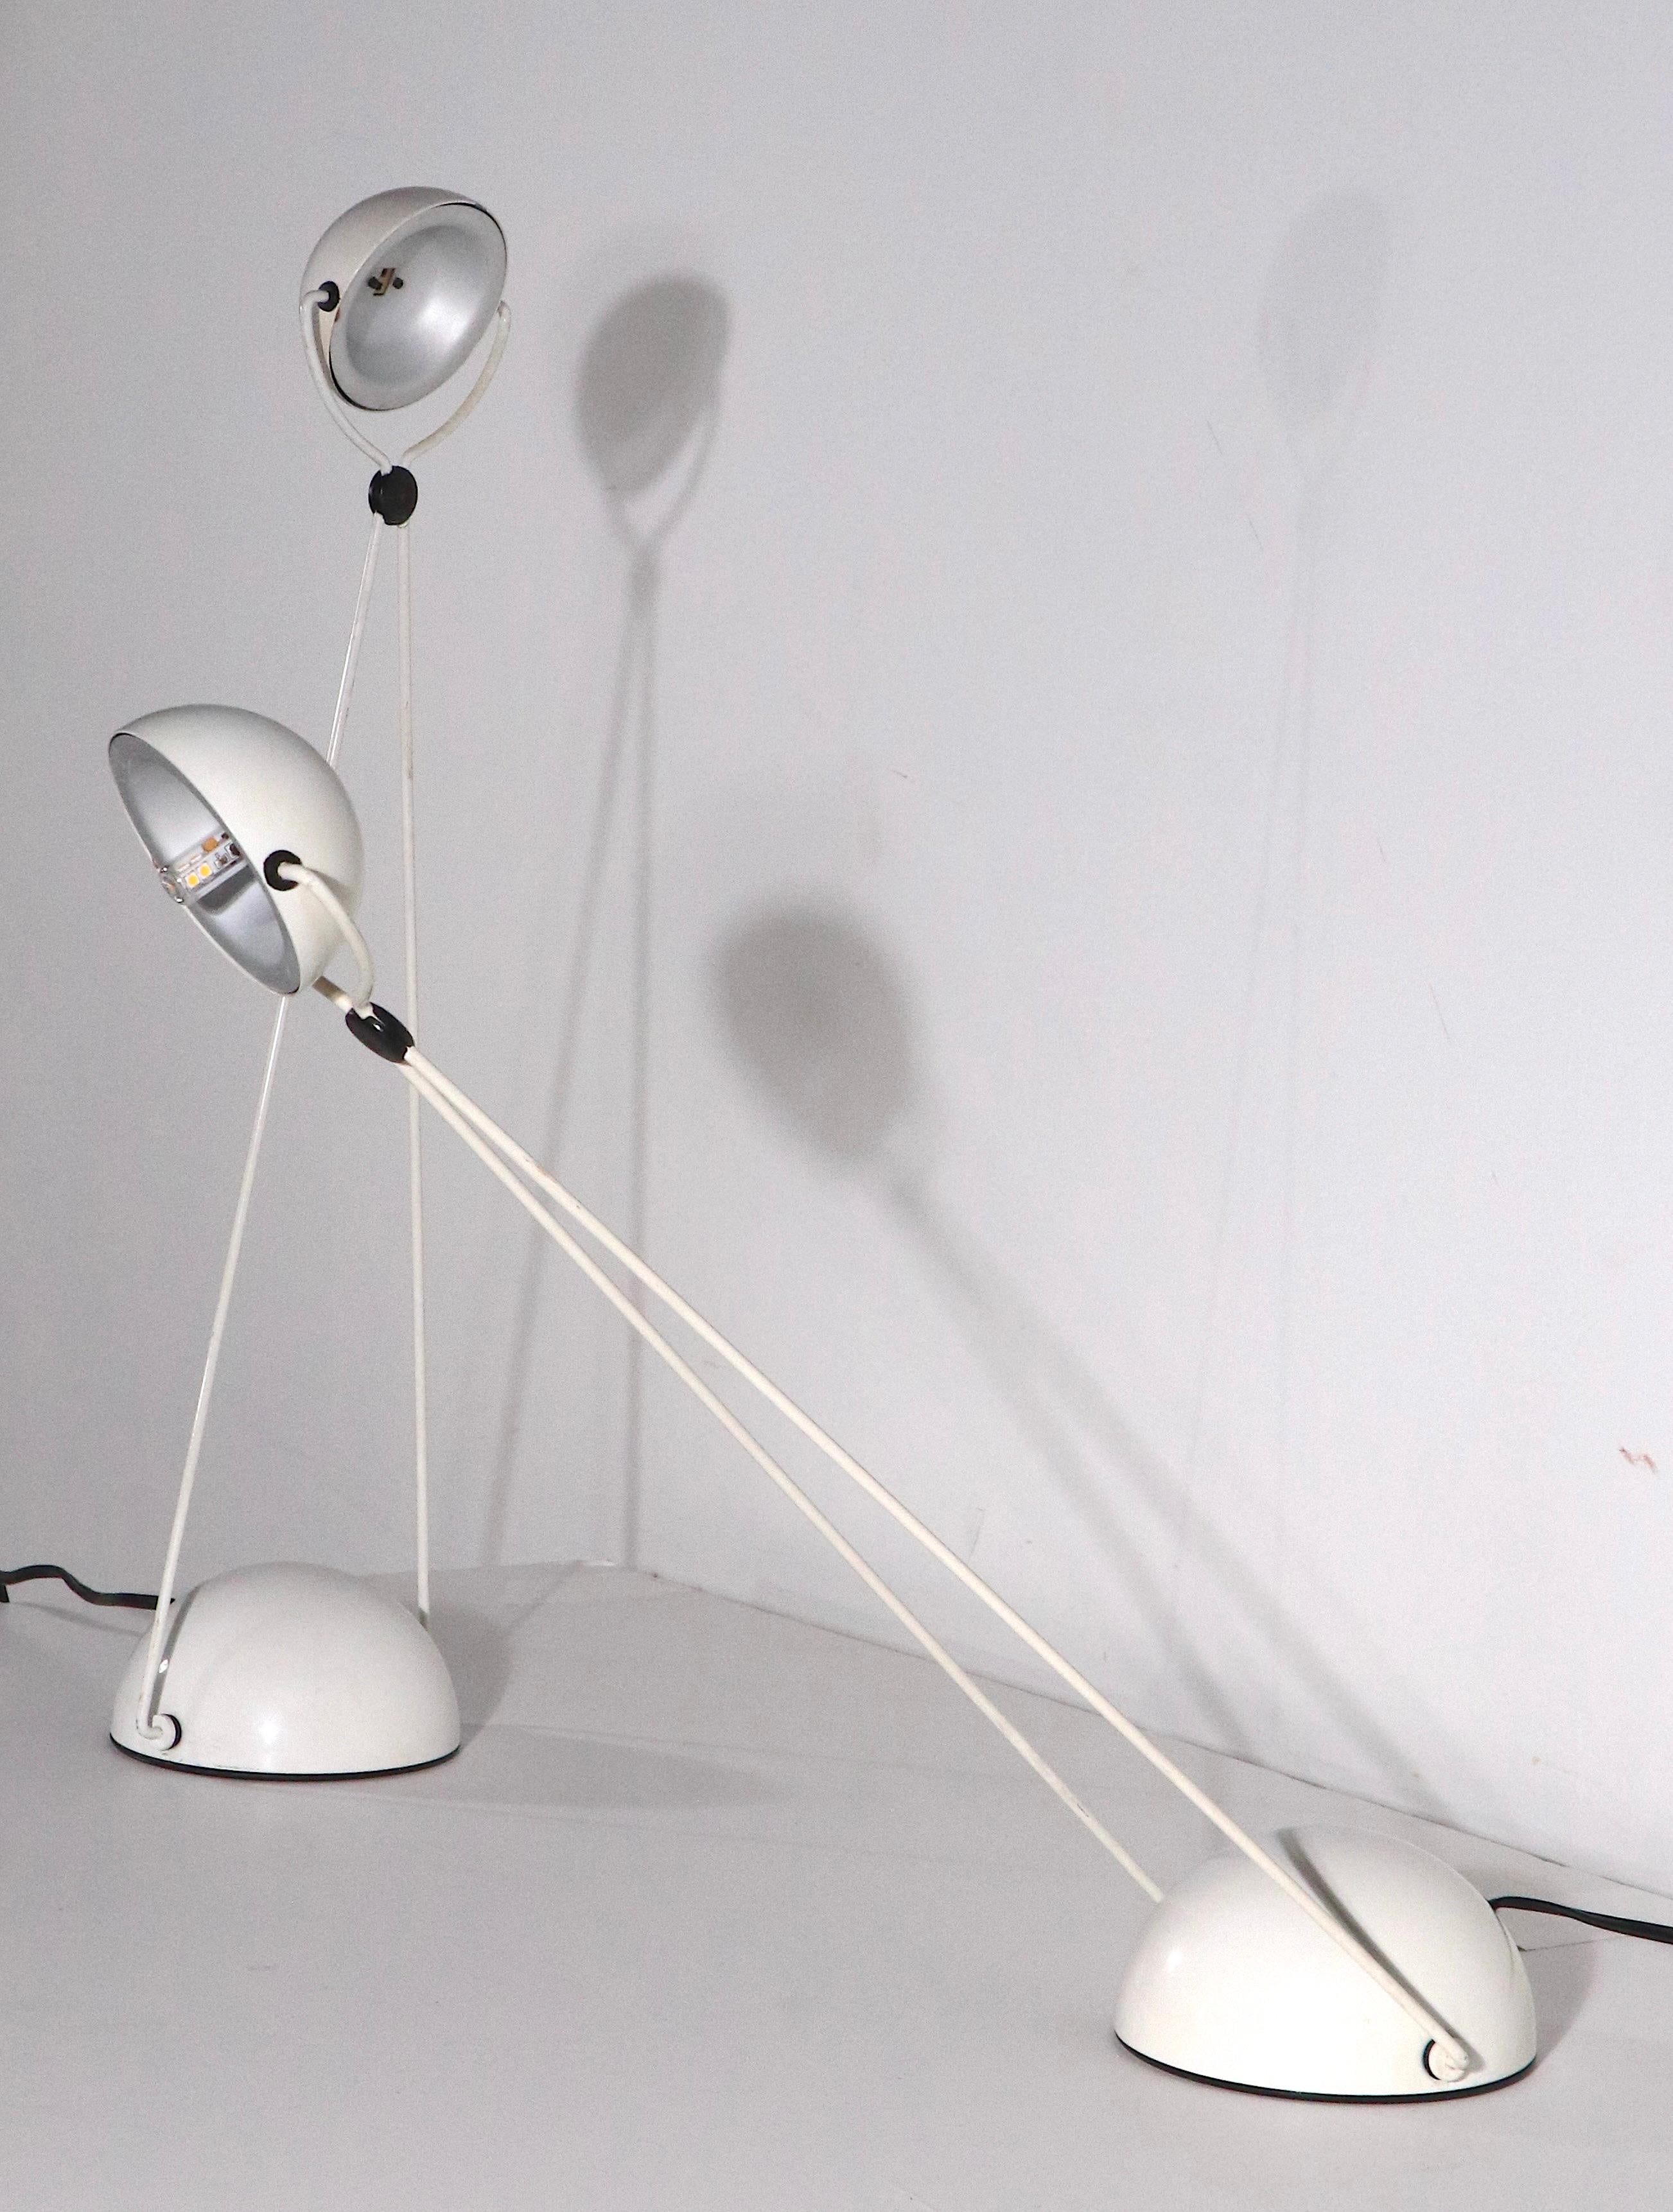 Post-Modern Pr Metal Angle Poise Lamps Designed by Stefano Cevoli Made in Milan Italy 1980s For Sale